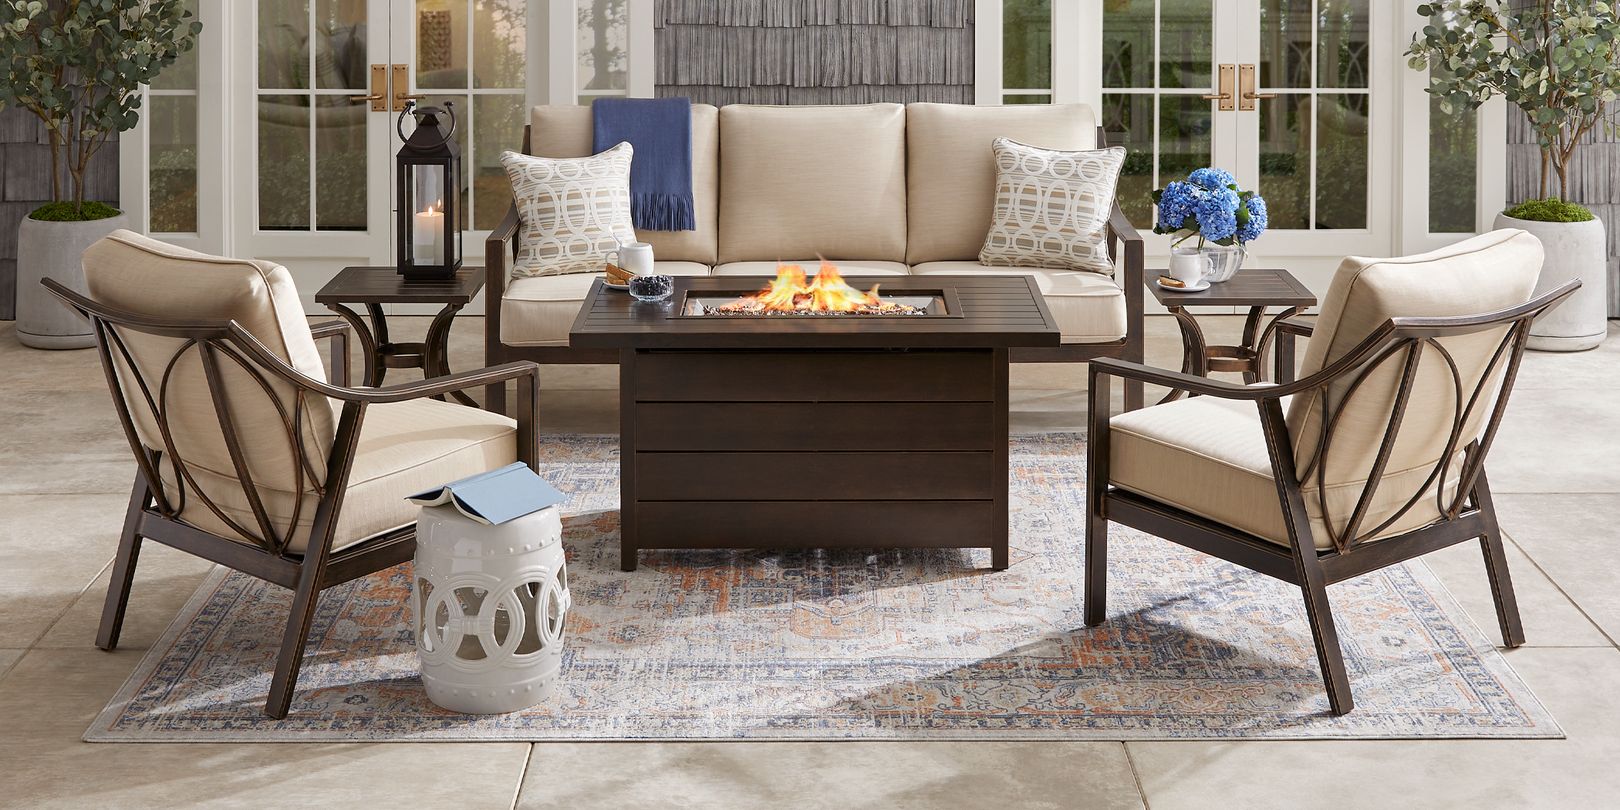 Photo of a brown outdoor seating arrangement with a fire pit and end tables